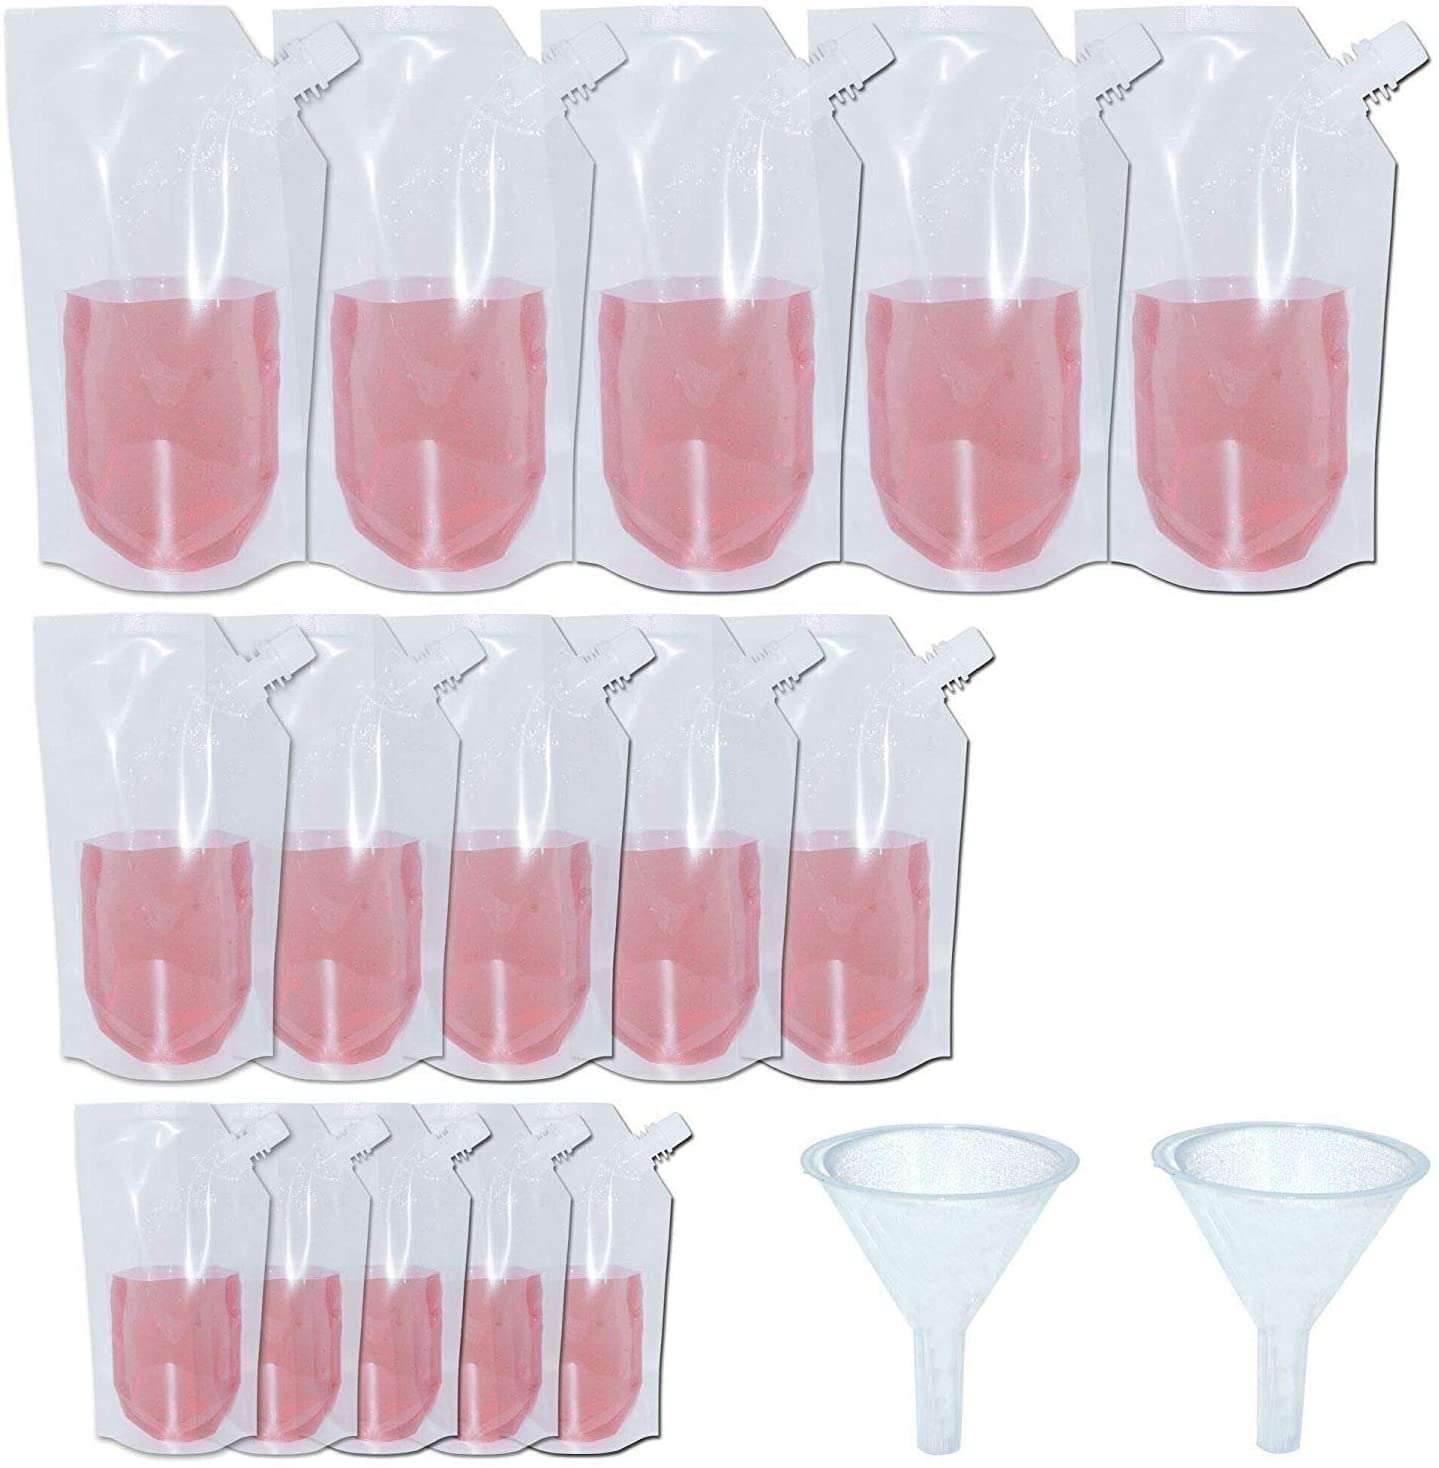 yushulin concealable collapsible liquor bags with funnel